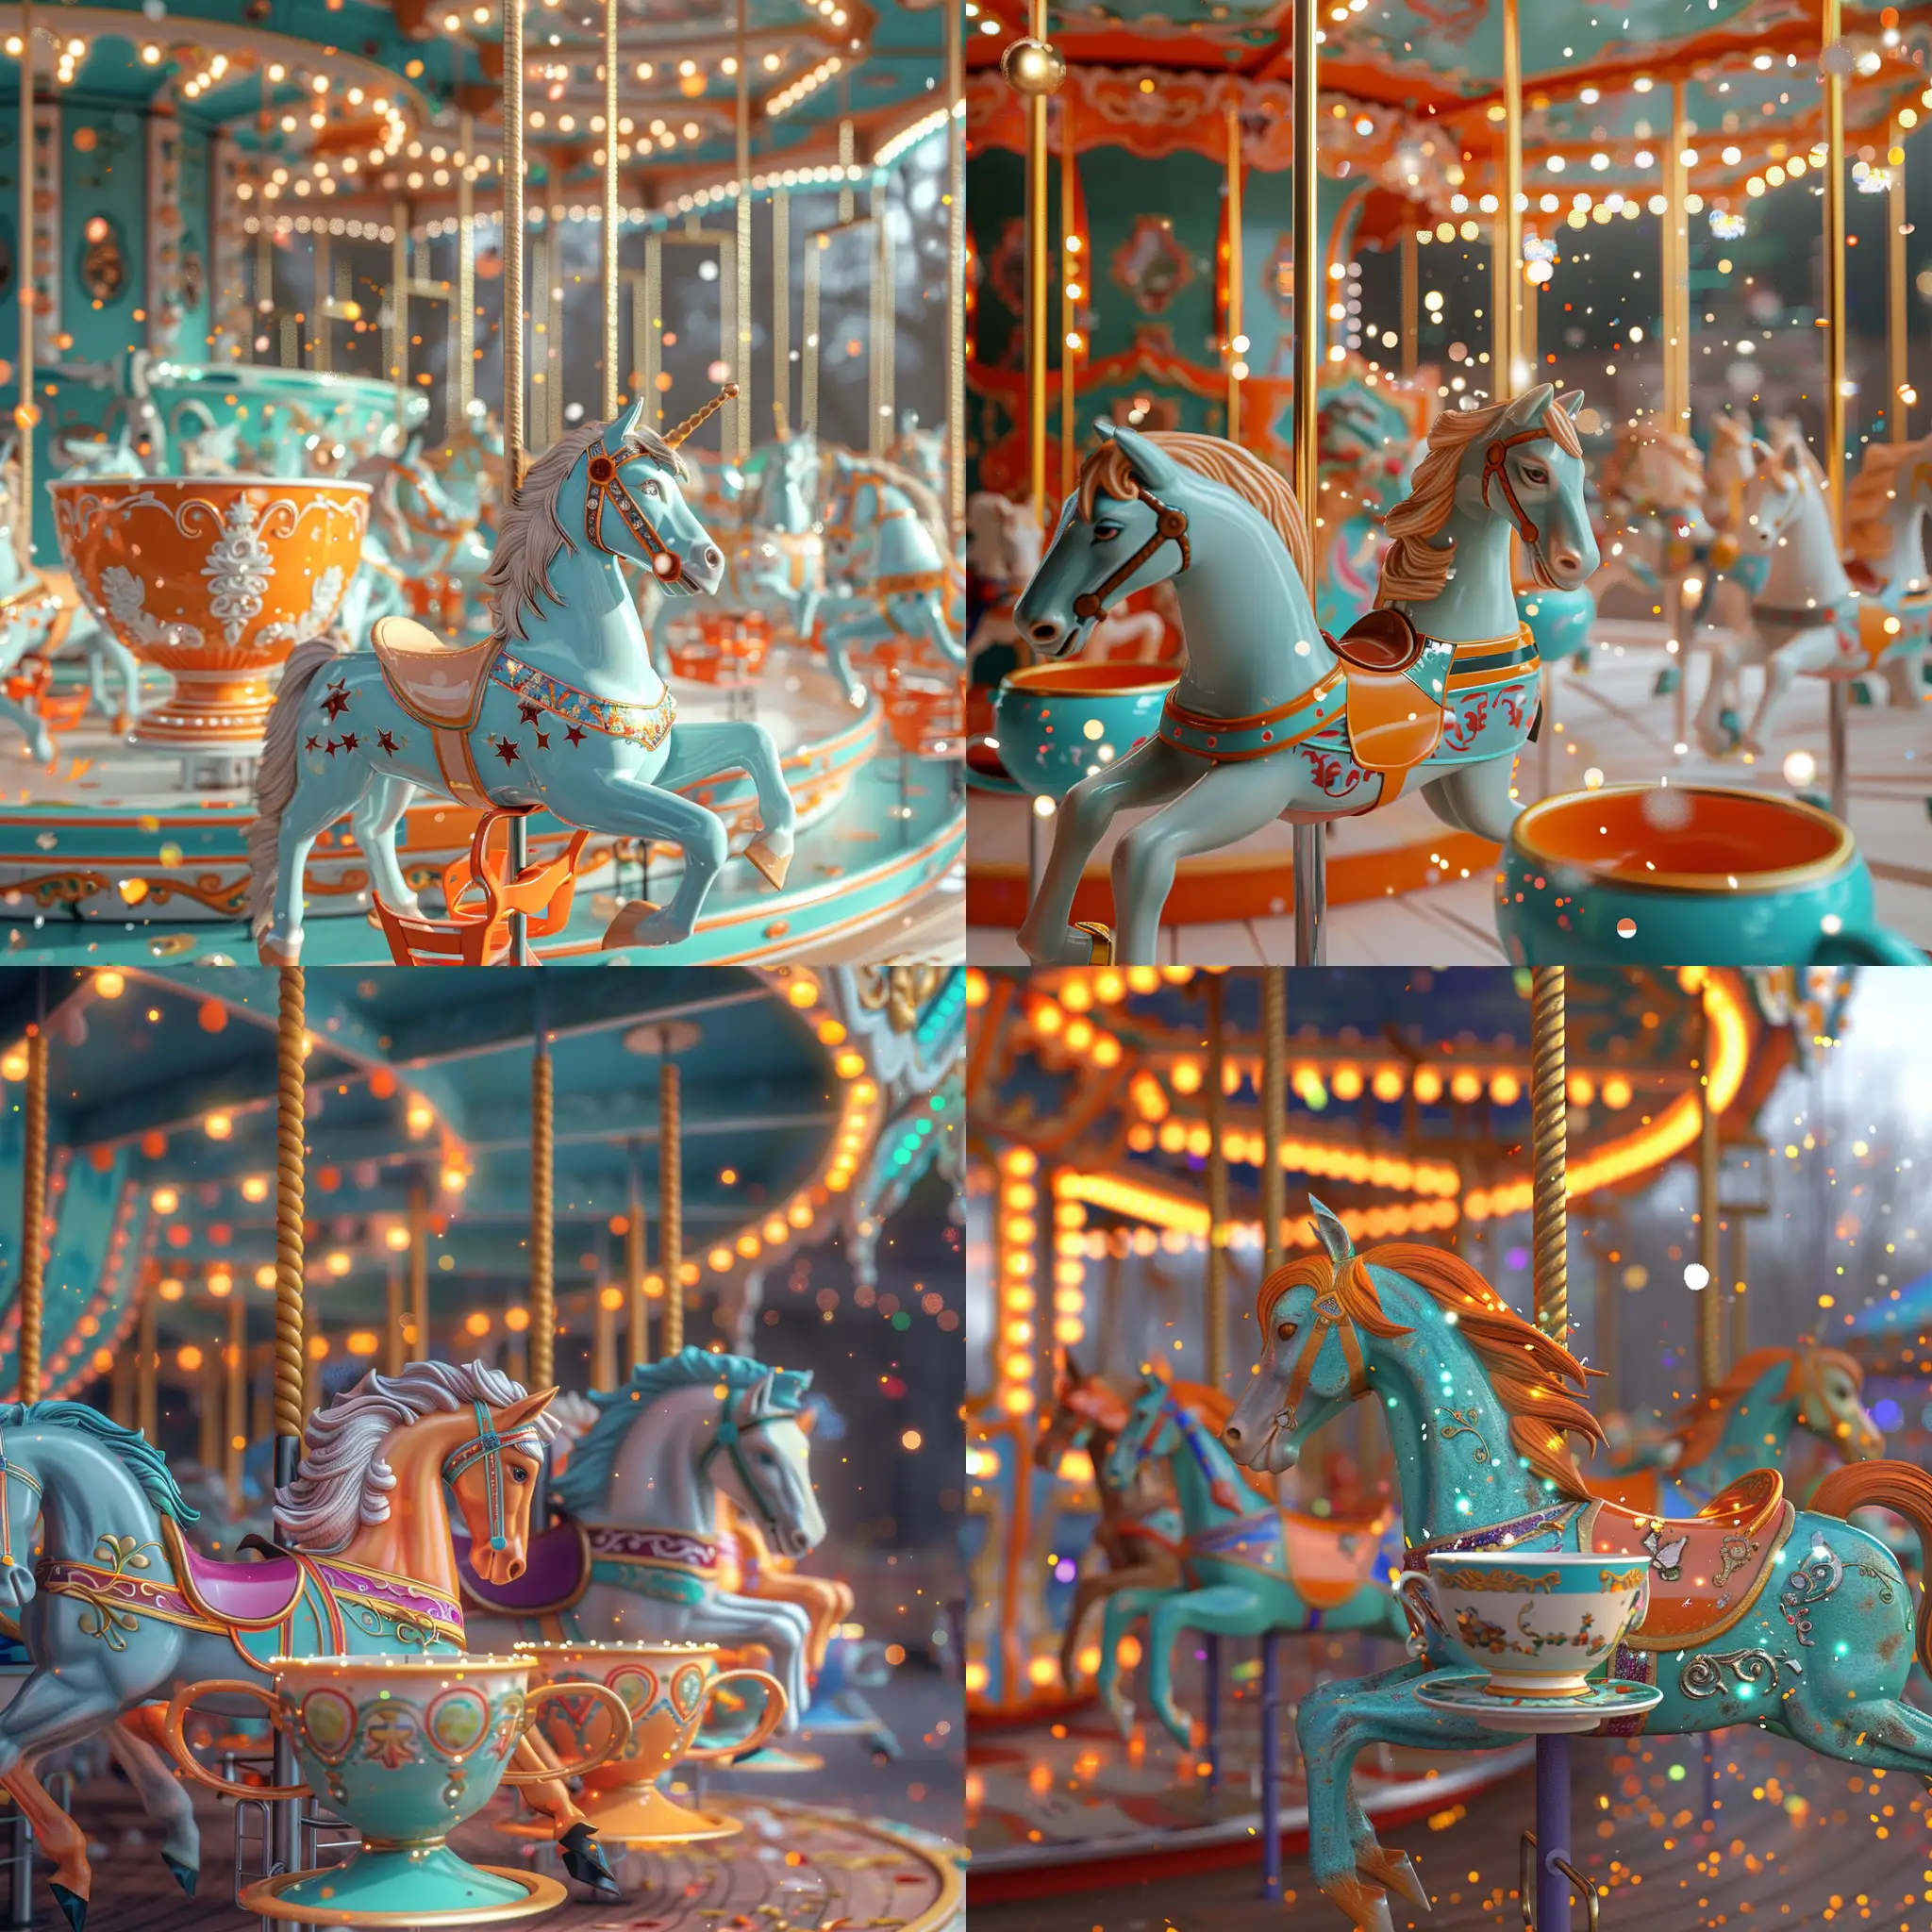 Whimsical-Carousel-Horses-and-Spinning-Teacups-at-Amusement-Park